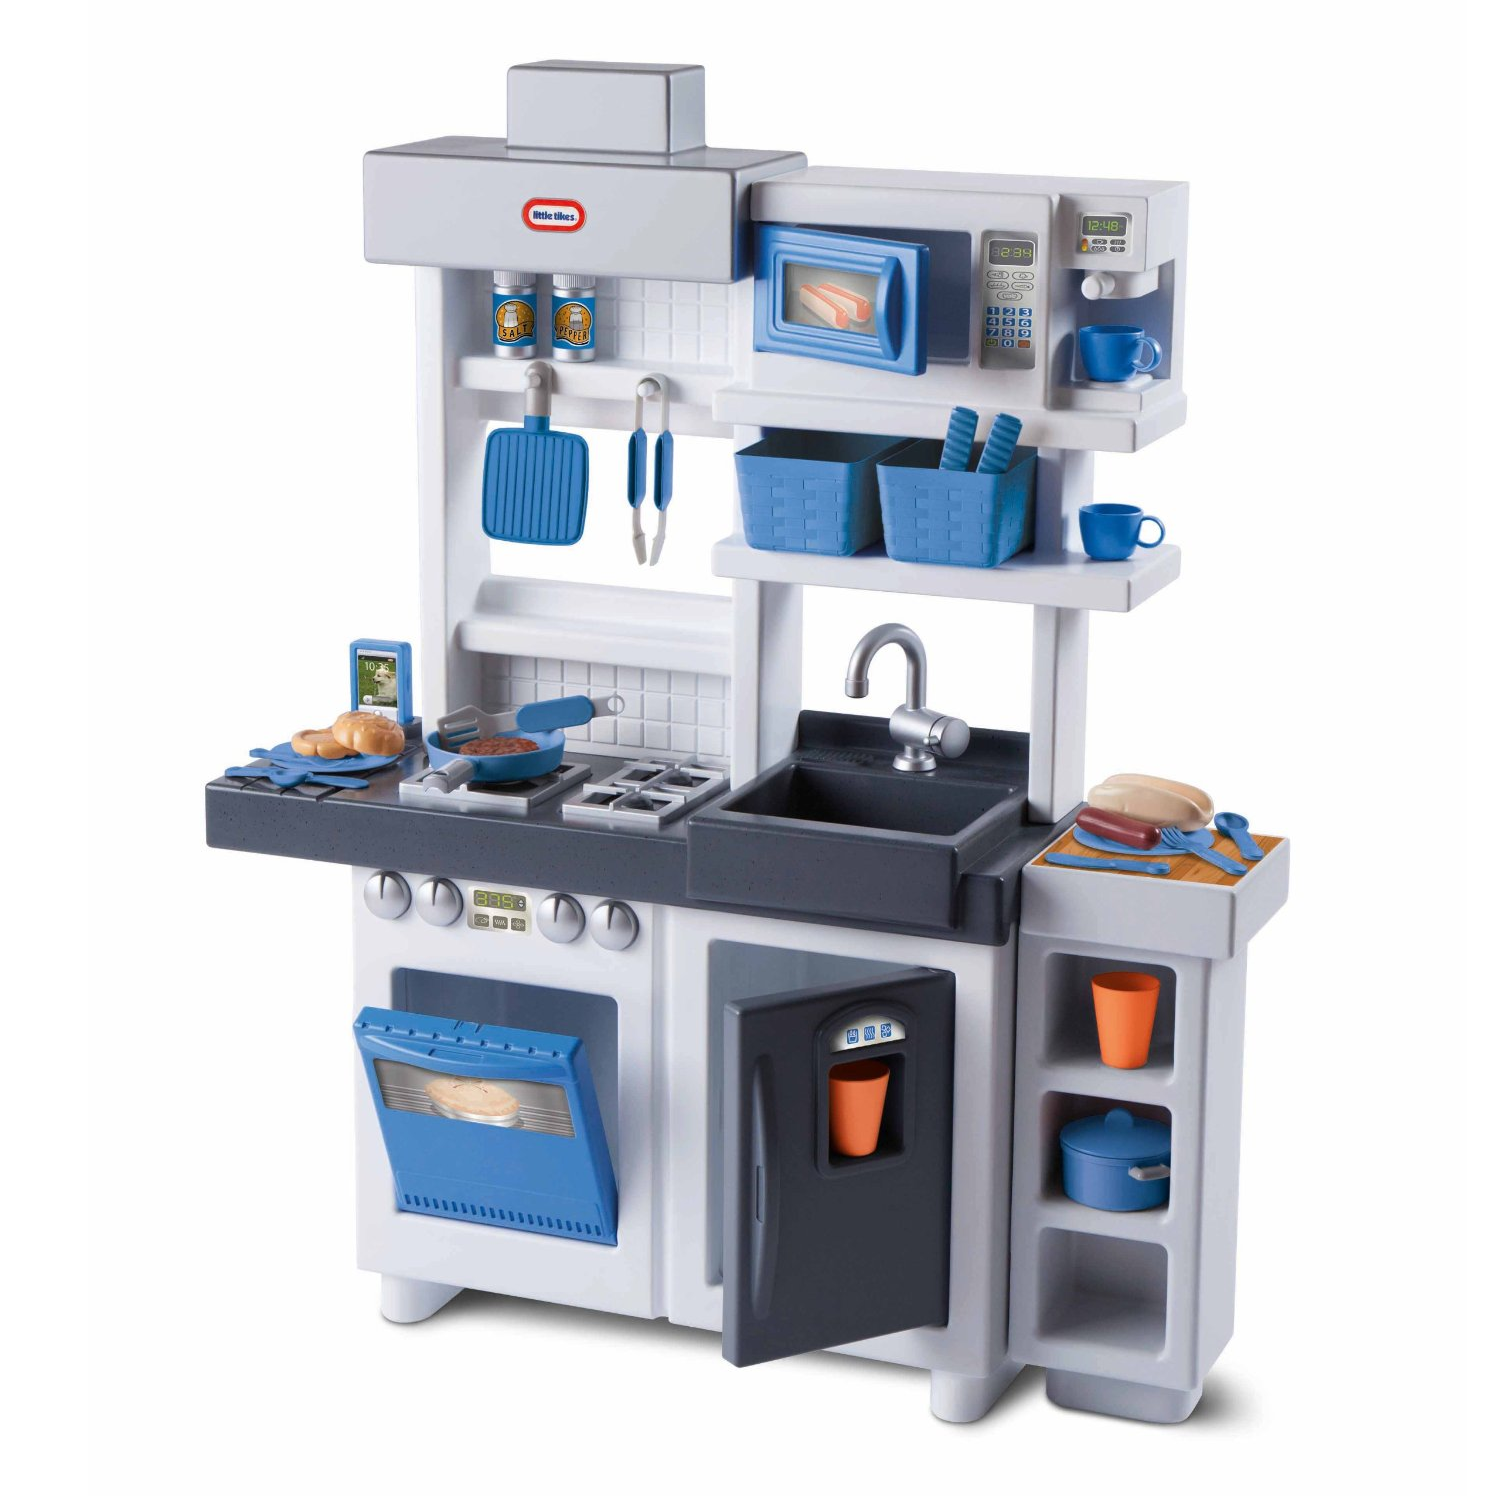 Little Tikes Ultimate Cook Kitchen Only $80.99 Shipped!